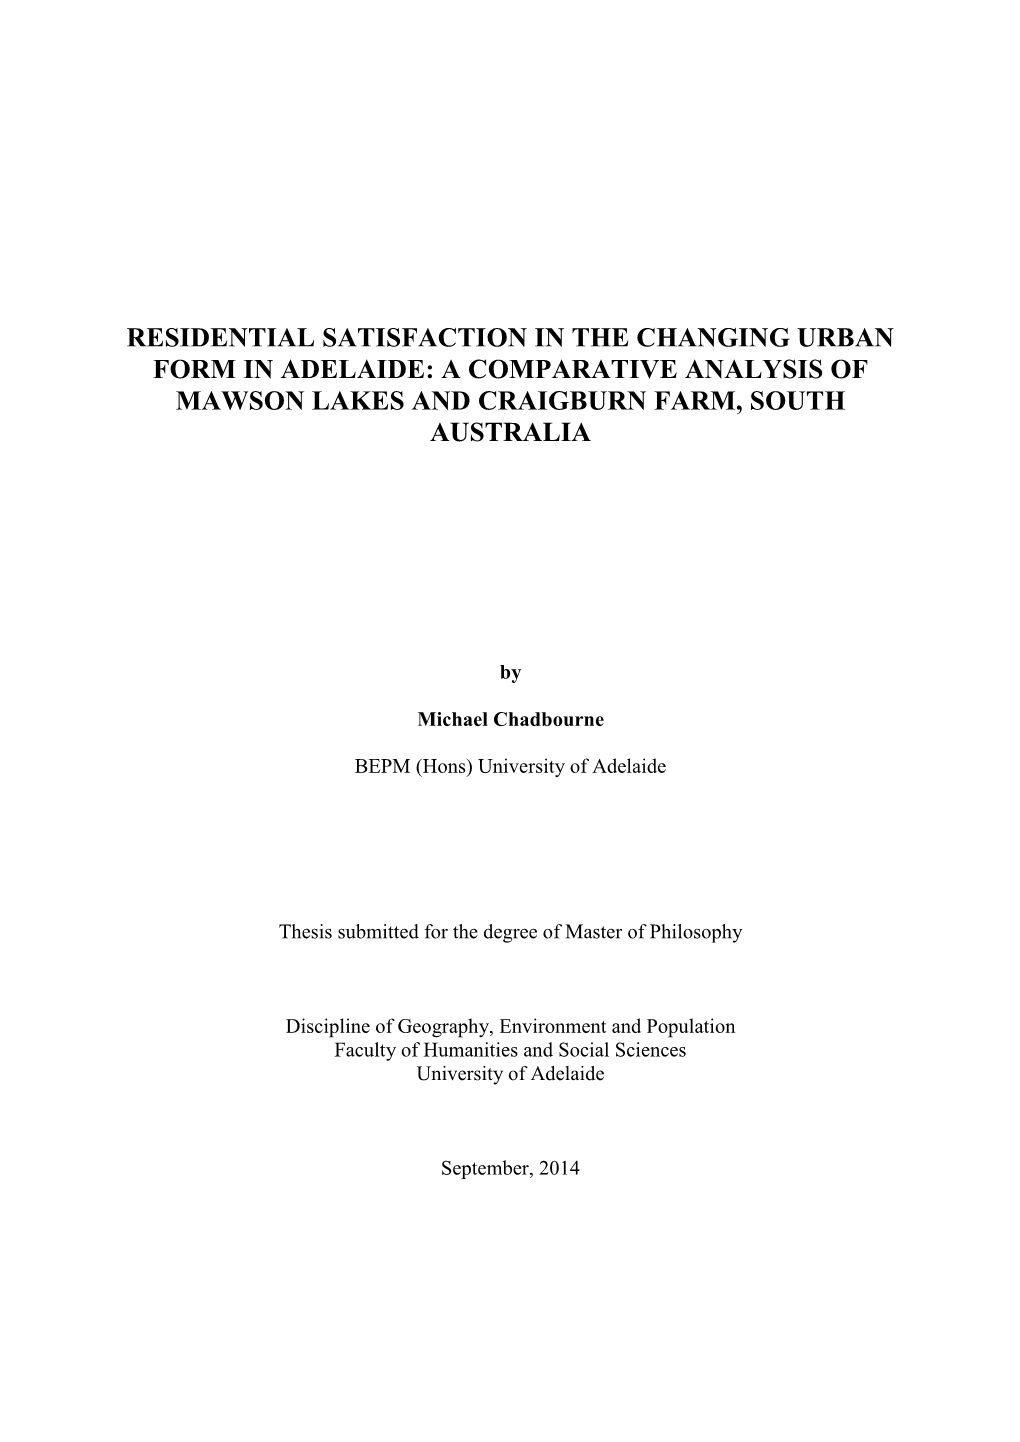 Residential Satisfaction in the Changing Urban Form in Adelaide: a Comparative Analysis of Mawson Lakes and Craigburn Farm, South Australia